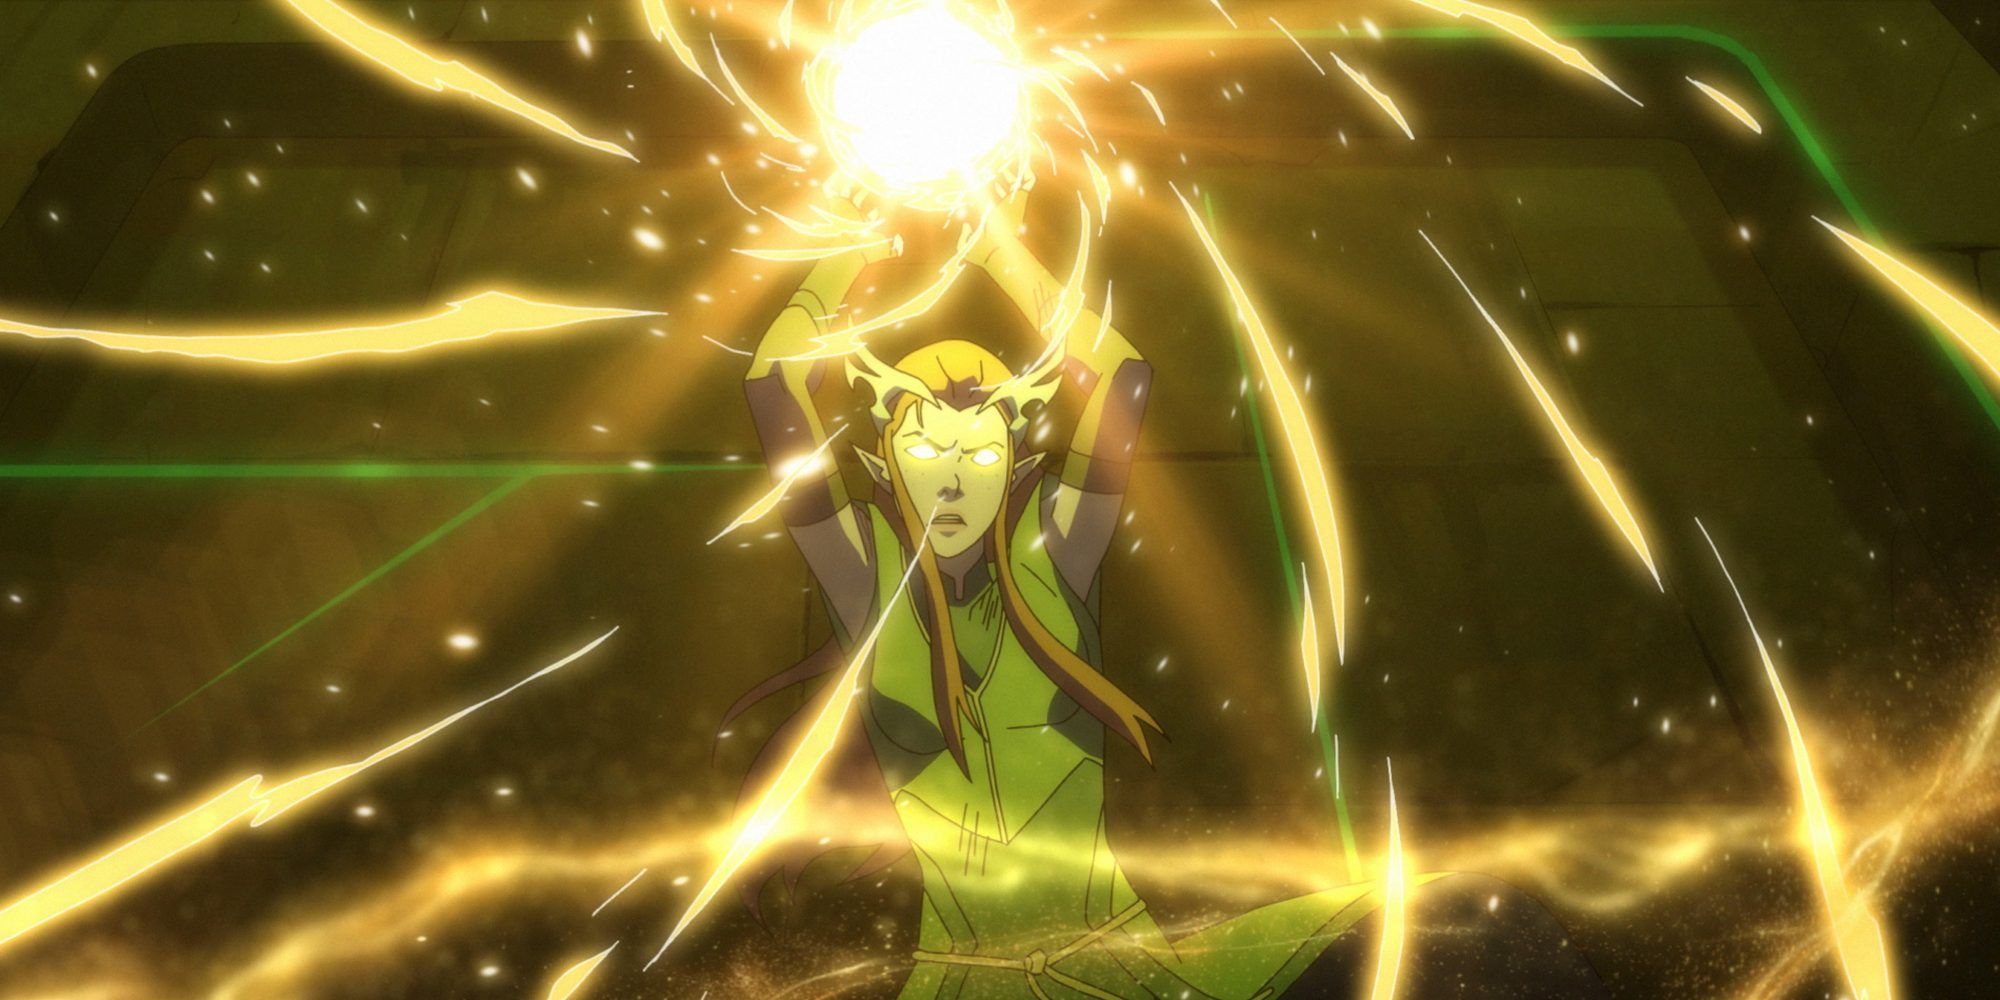 Vox Machina's Keyleth holds a glowing spell above her head